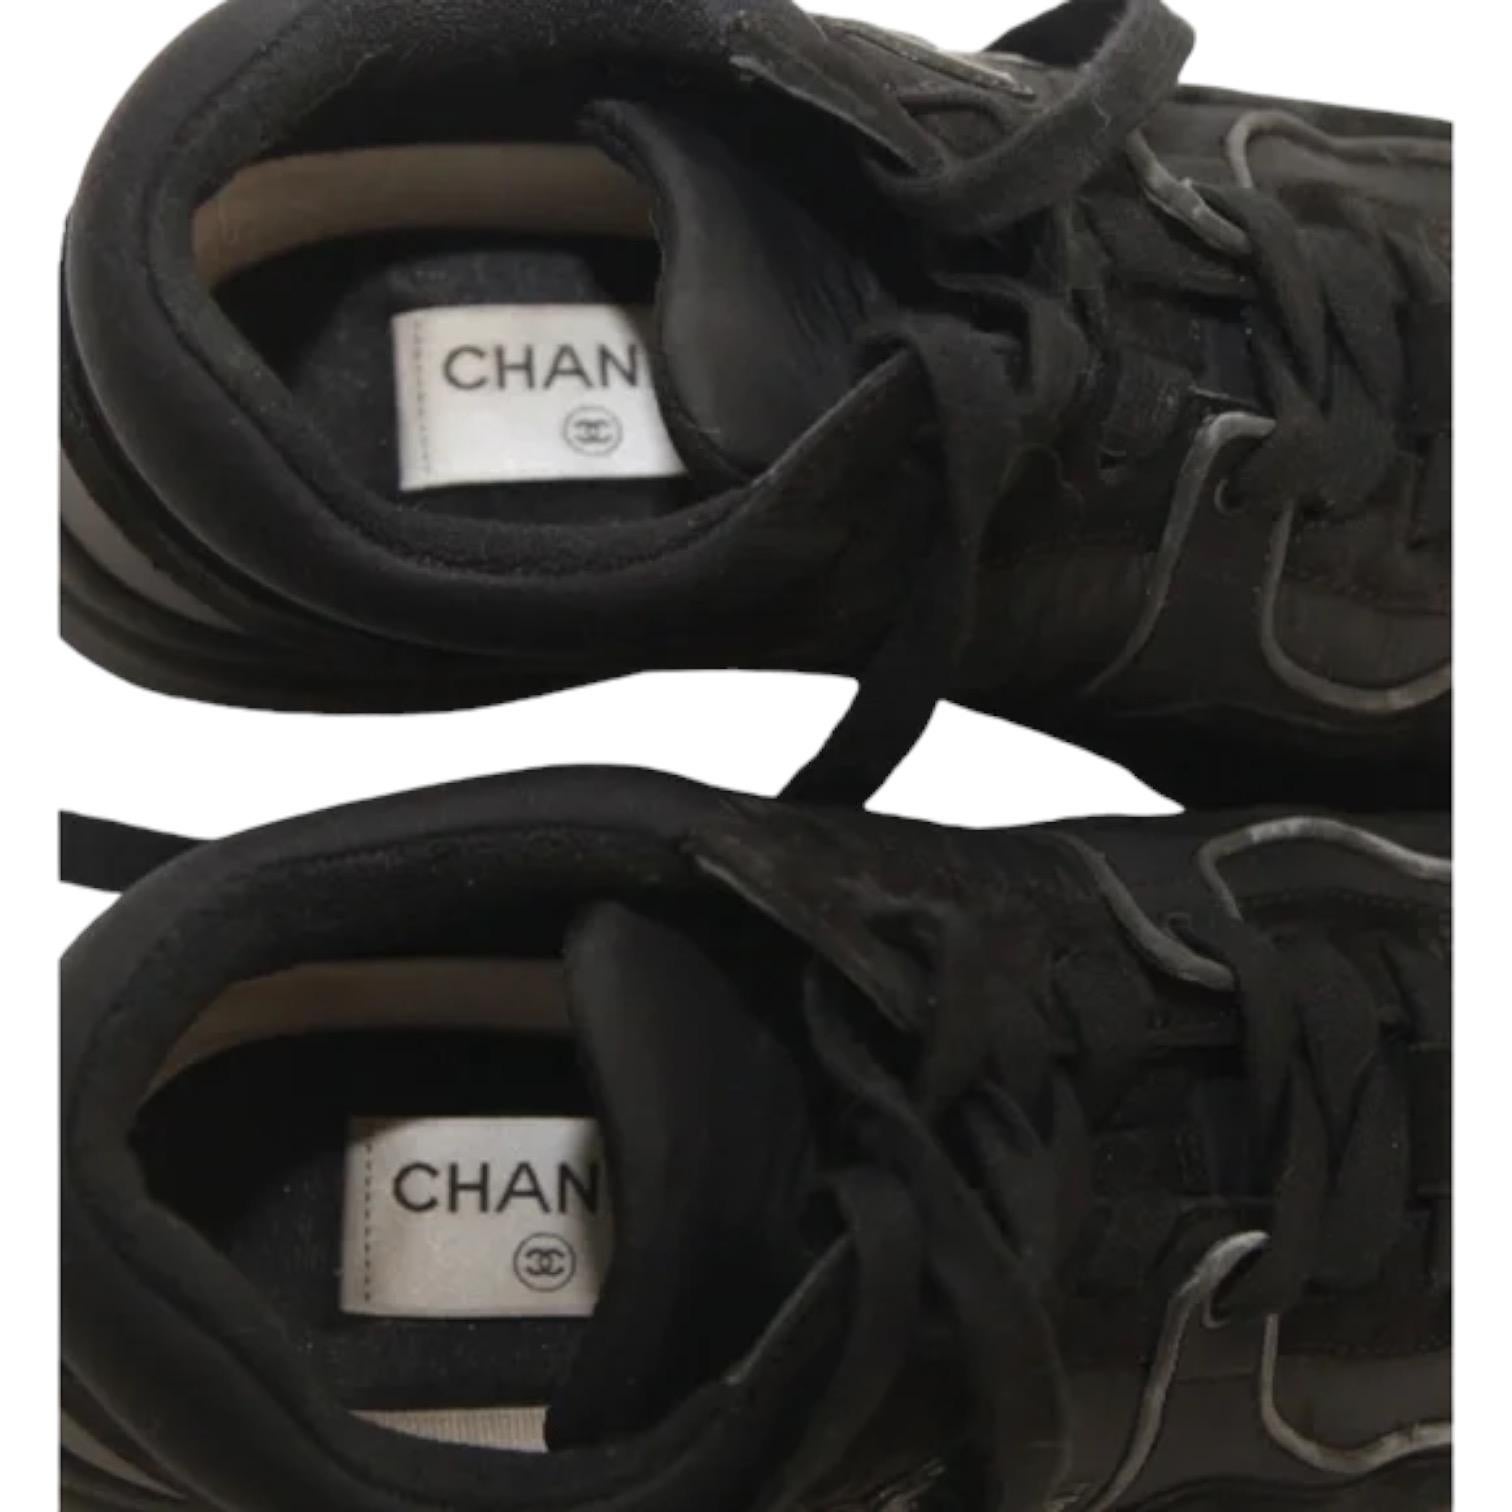 CHANEL Black Sneaker Trainer Fabric Suede Lace-Up CC Logo Low Top Sz 38 2022 6